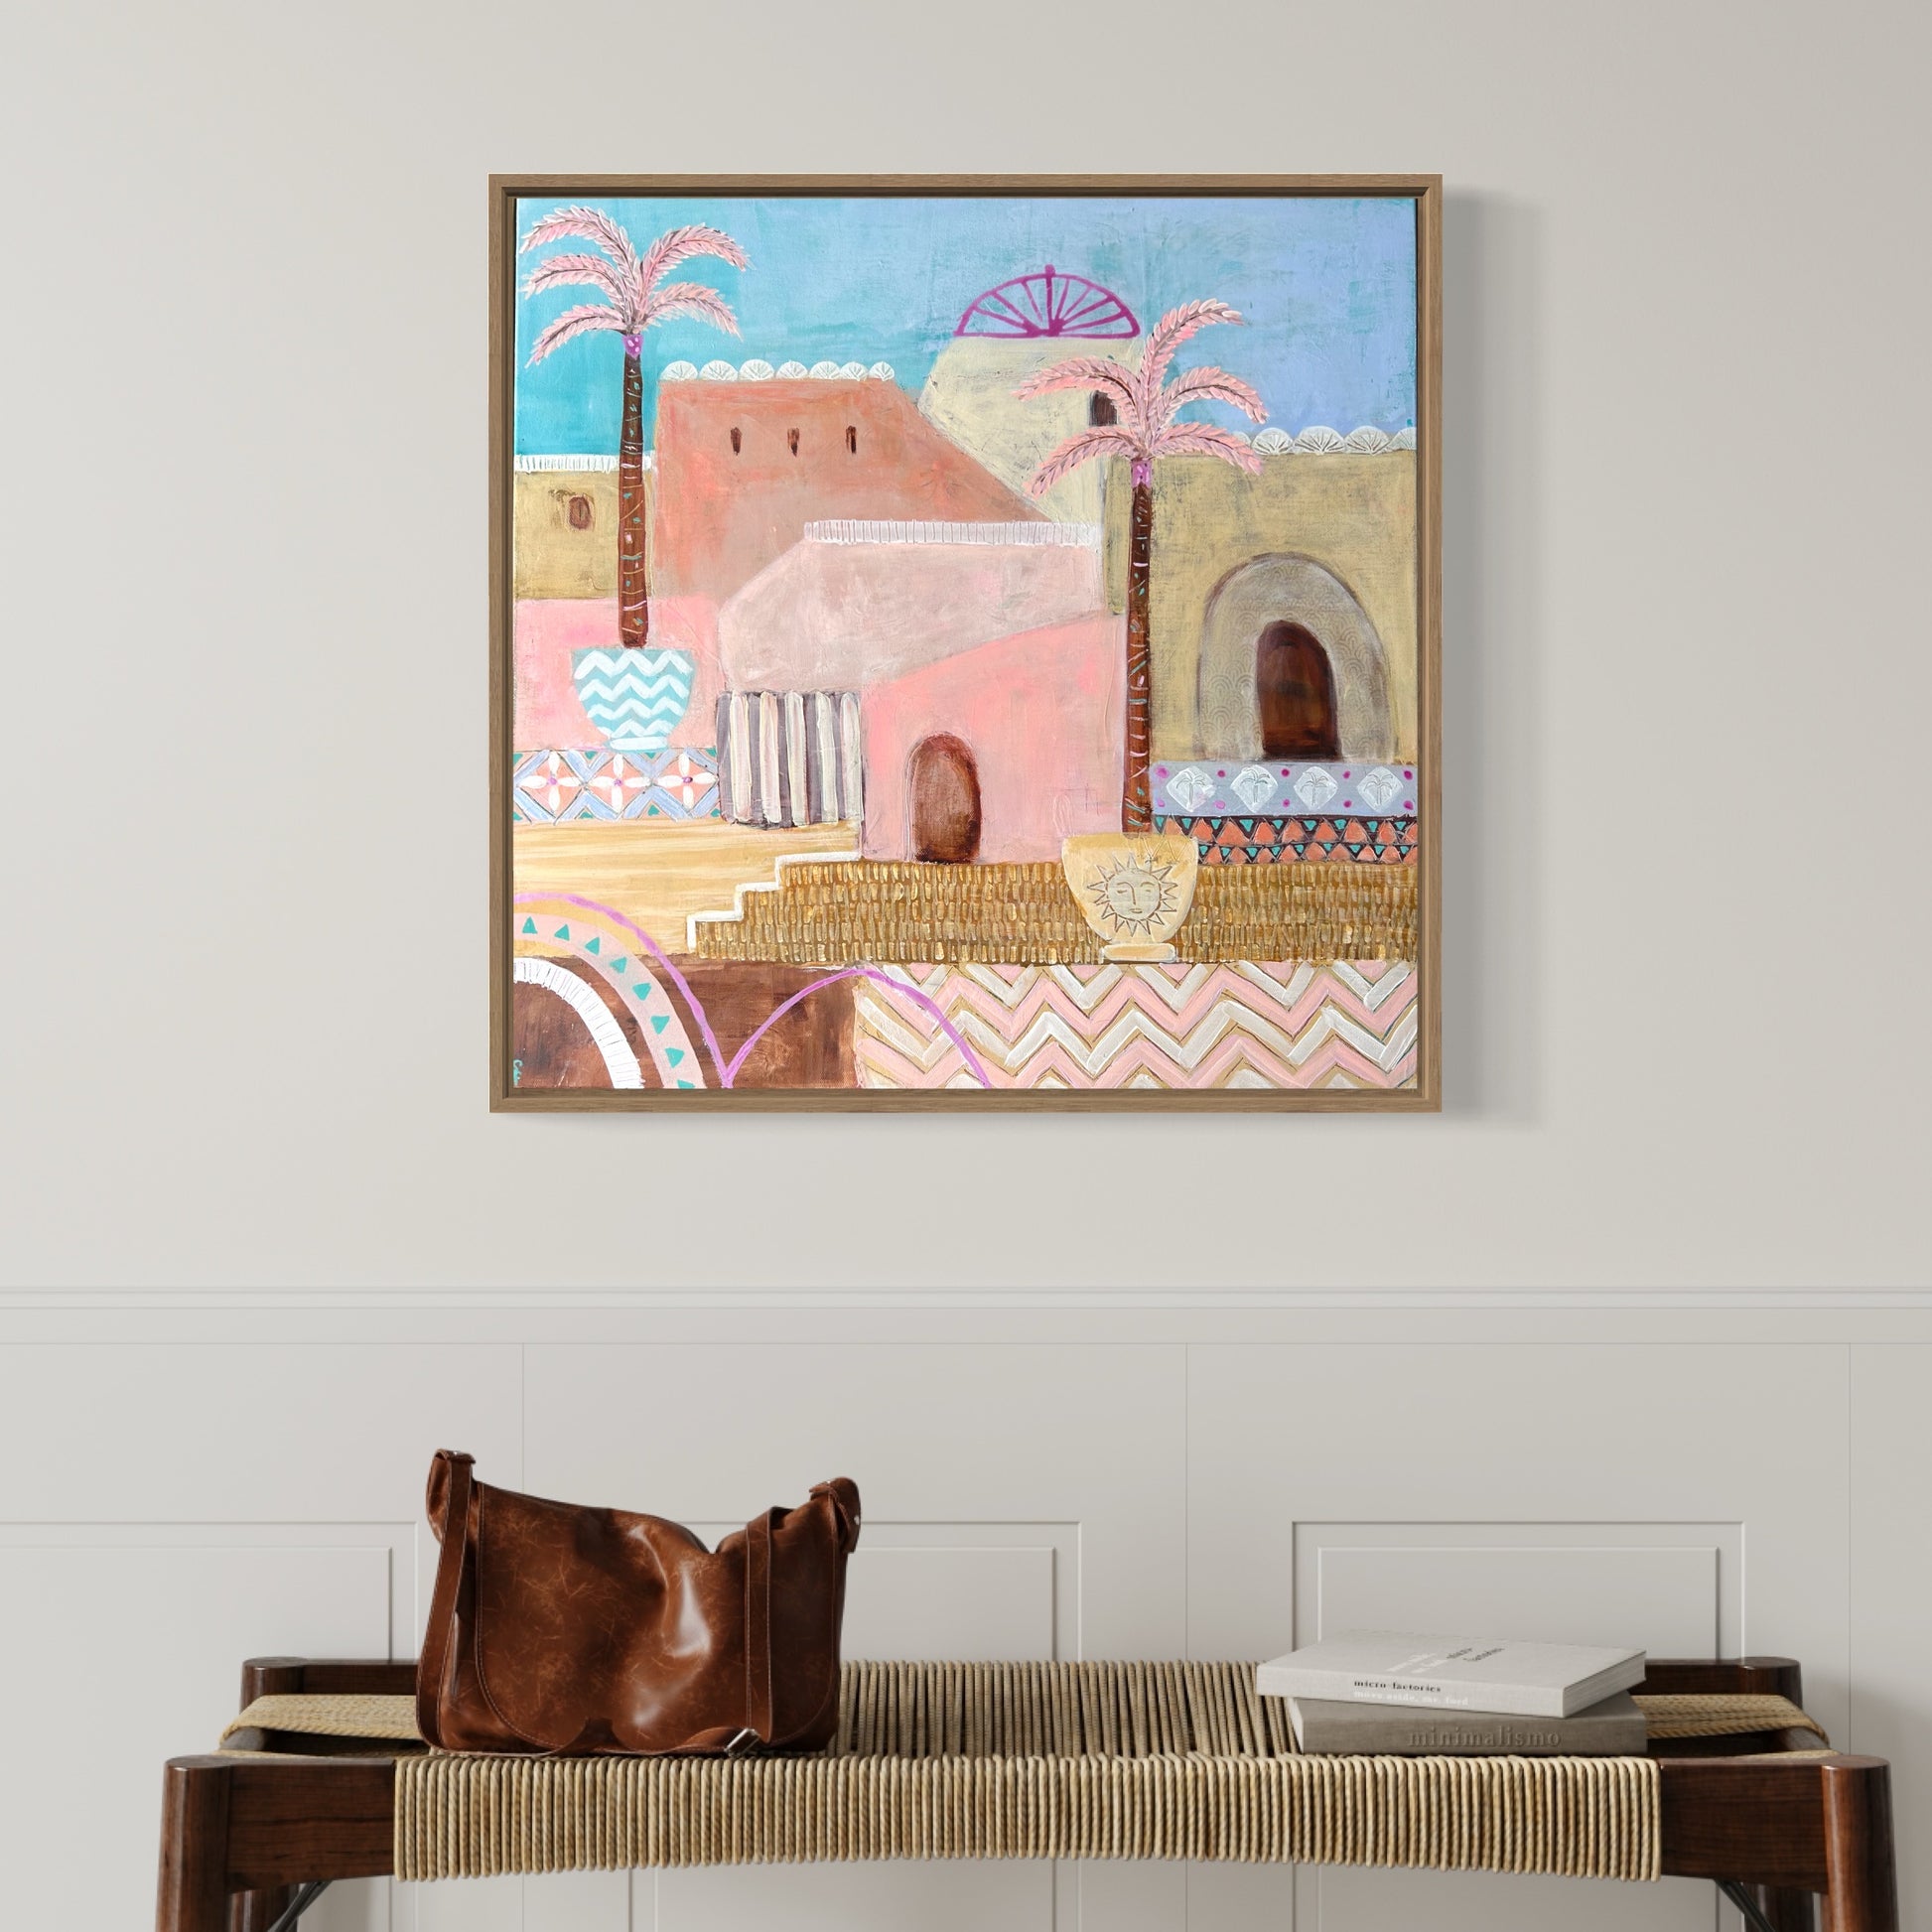 Original artwork in pinks and yellows of Moroccan median with palm trees, framed on wall in front of side table with leather handbag